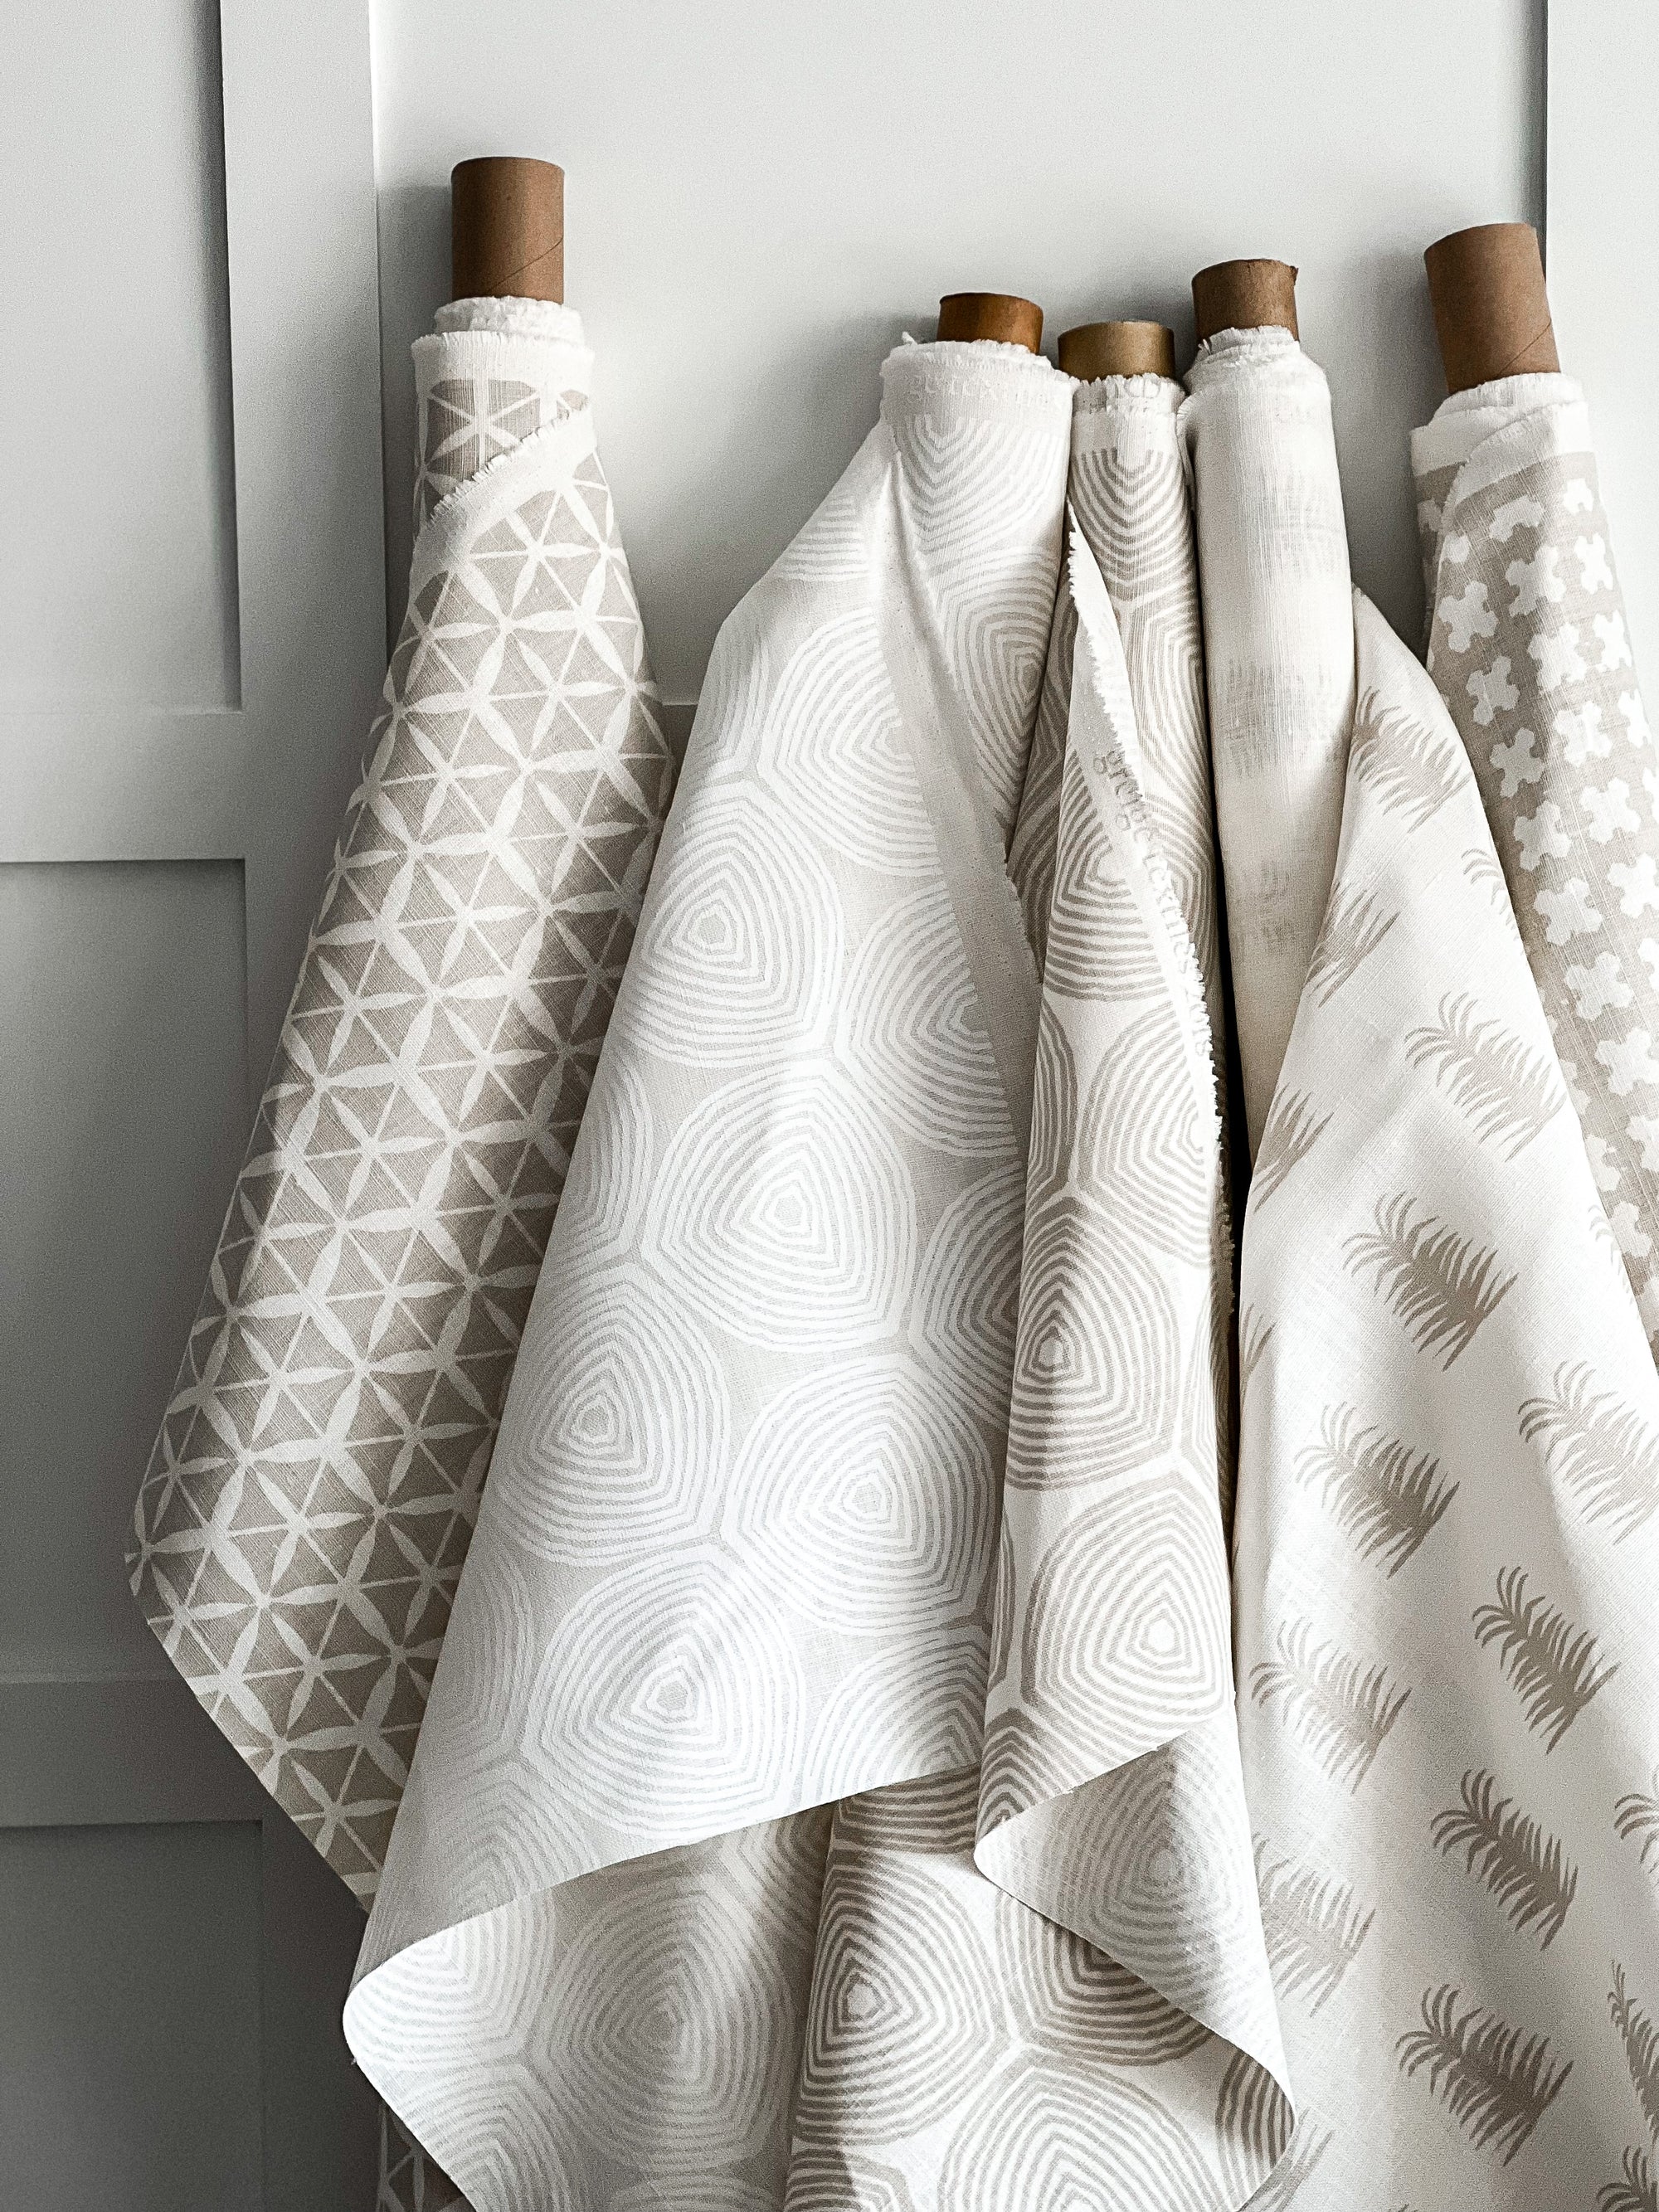 greige textiles has reimagined Winter Whites with a modern and versatile new look for some of their classic patterns.